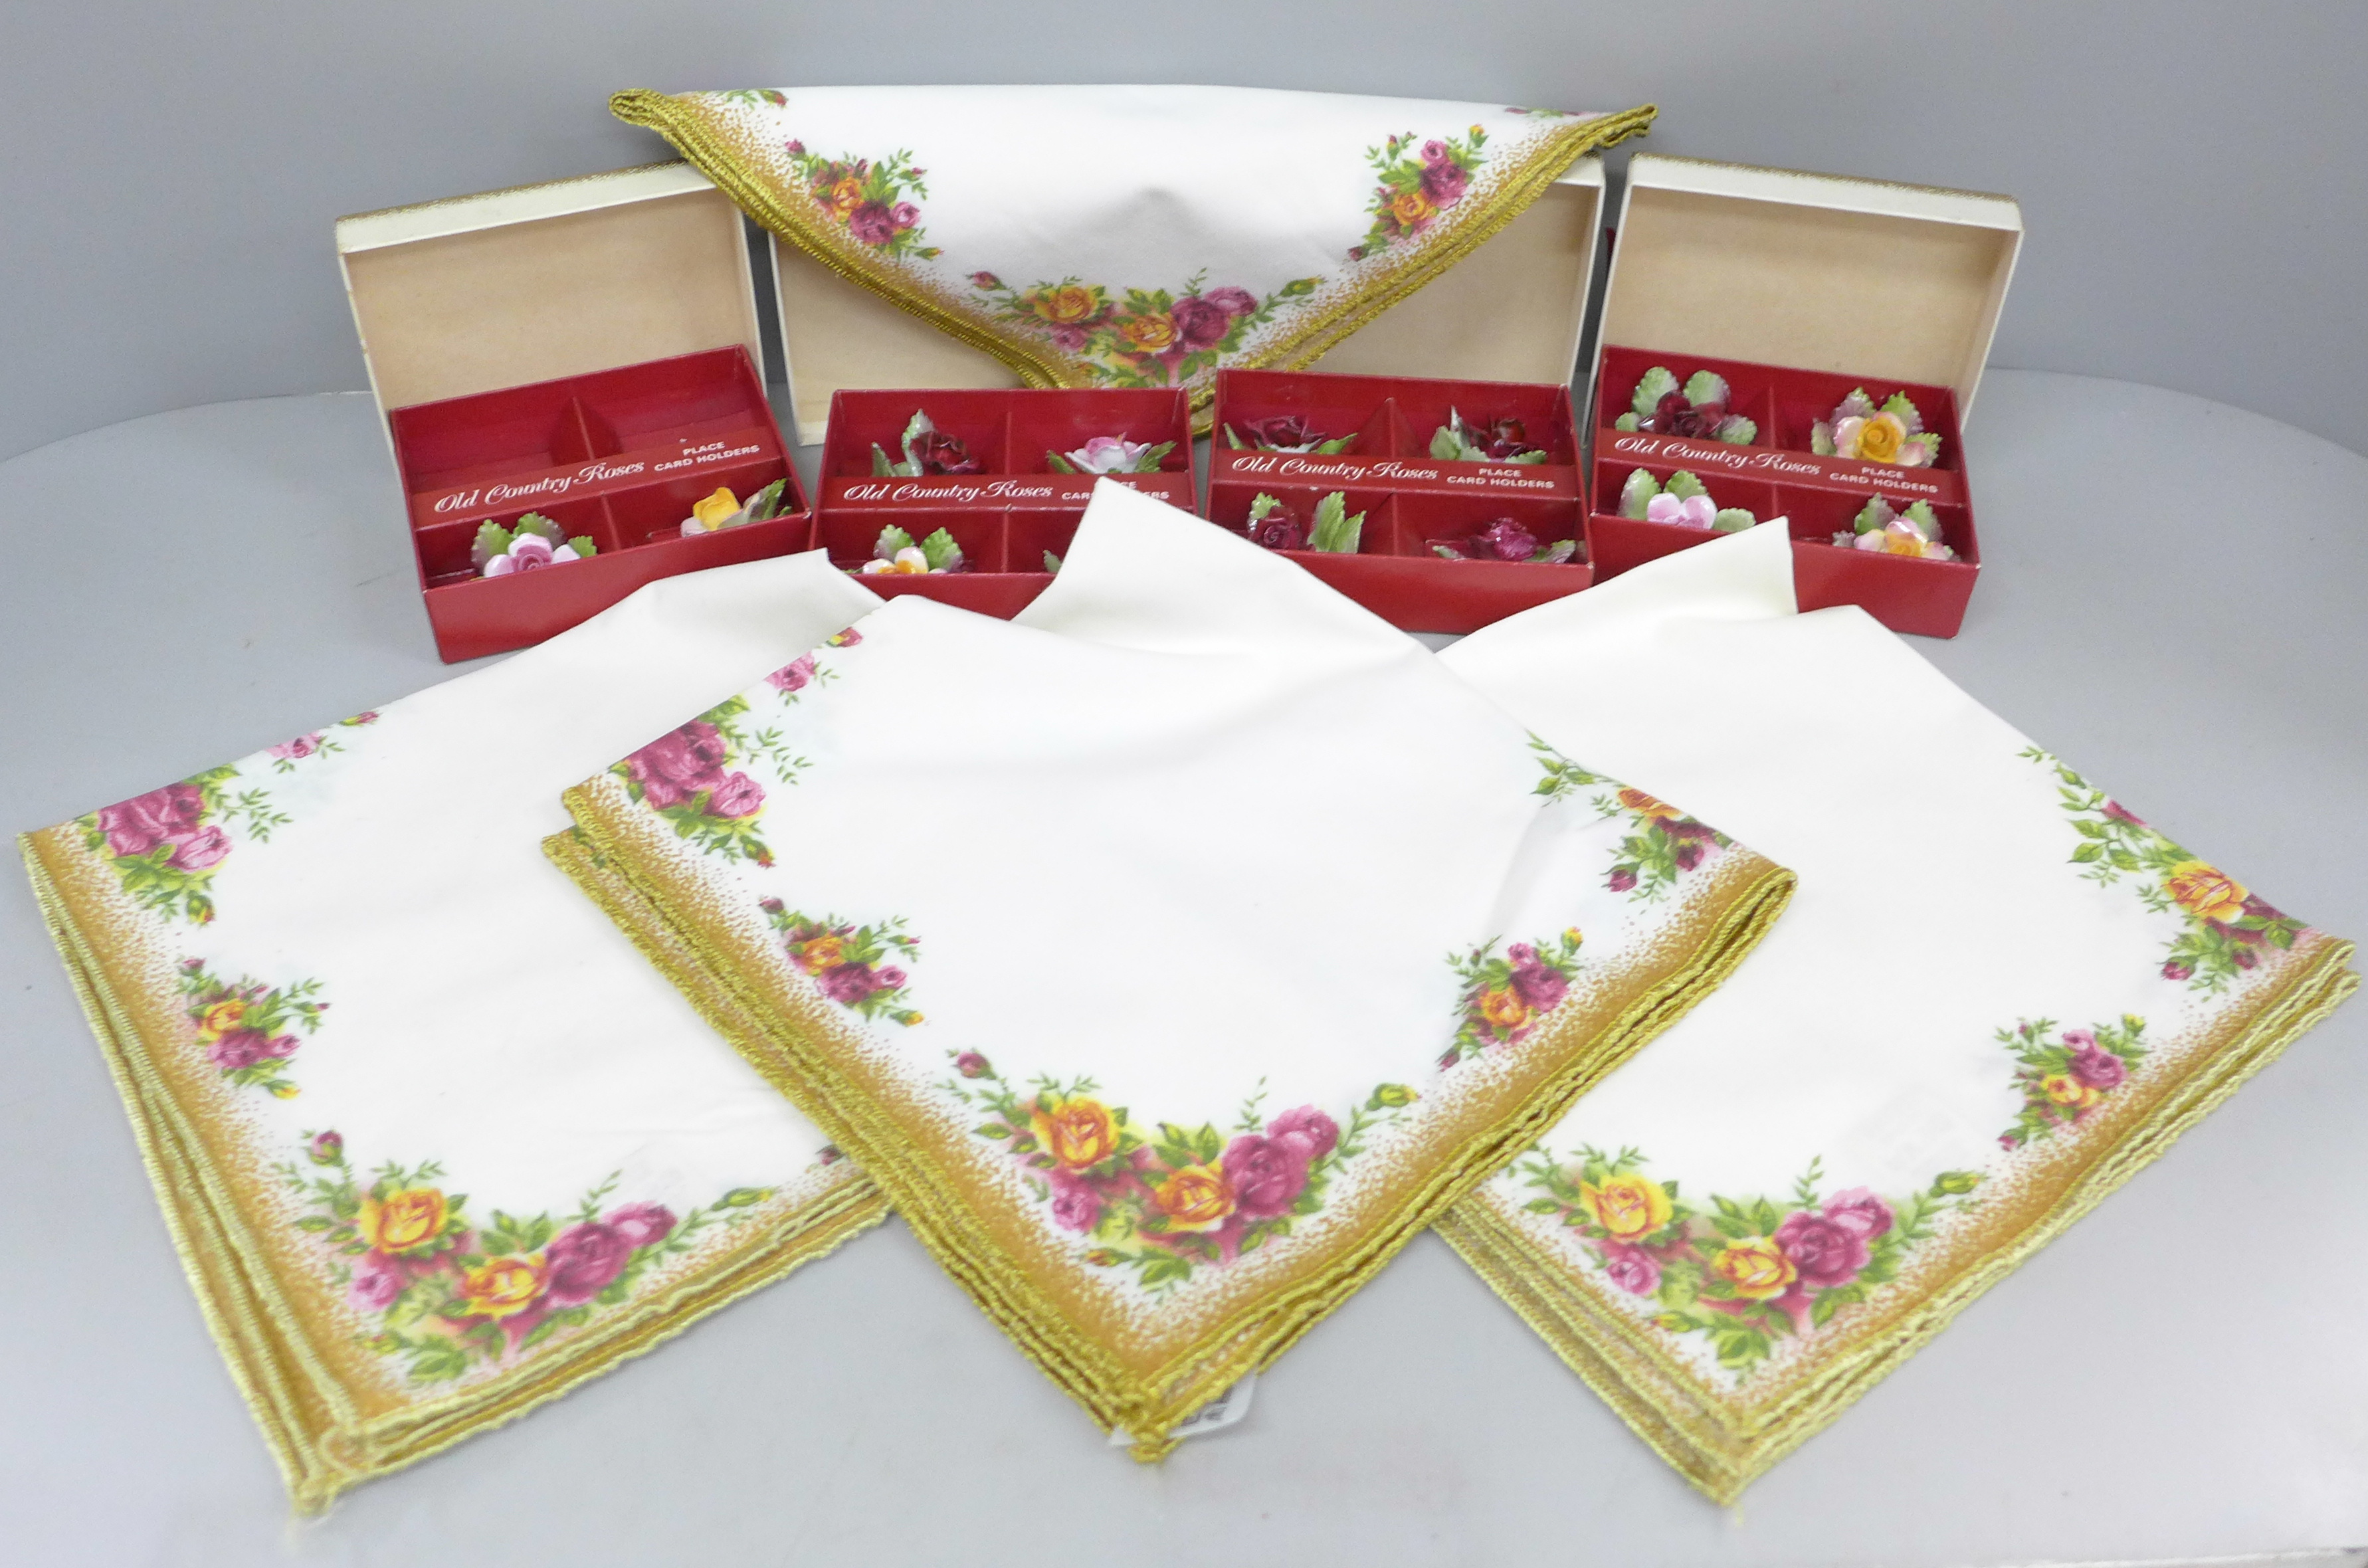 Four sets of 4 Royal Albert Old Country Roses place holders and a set of four napkins